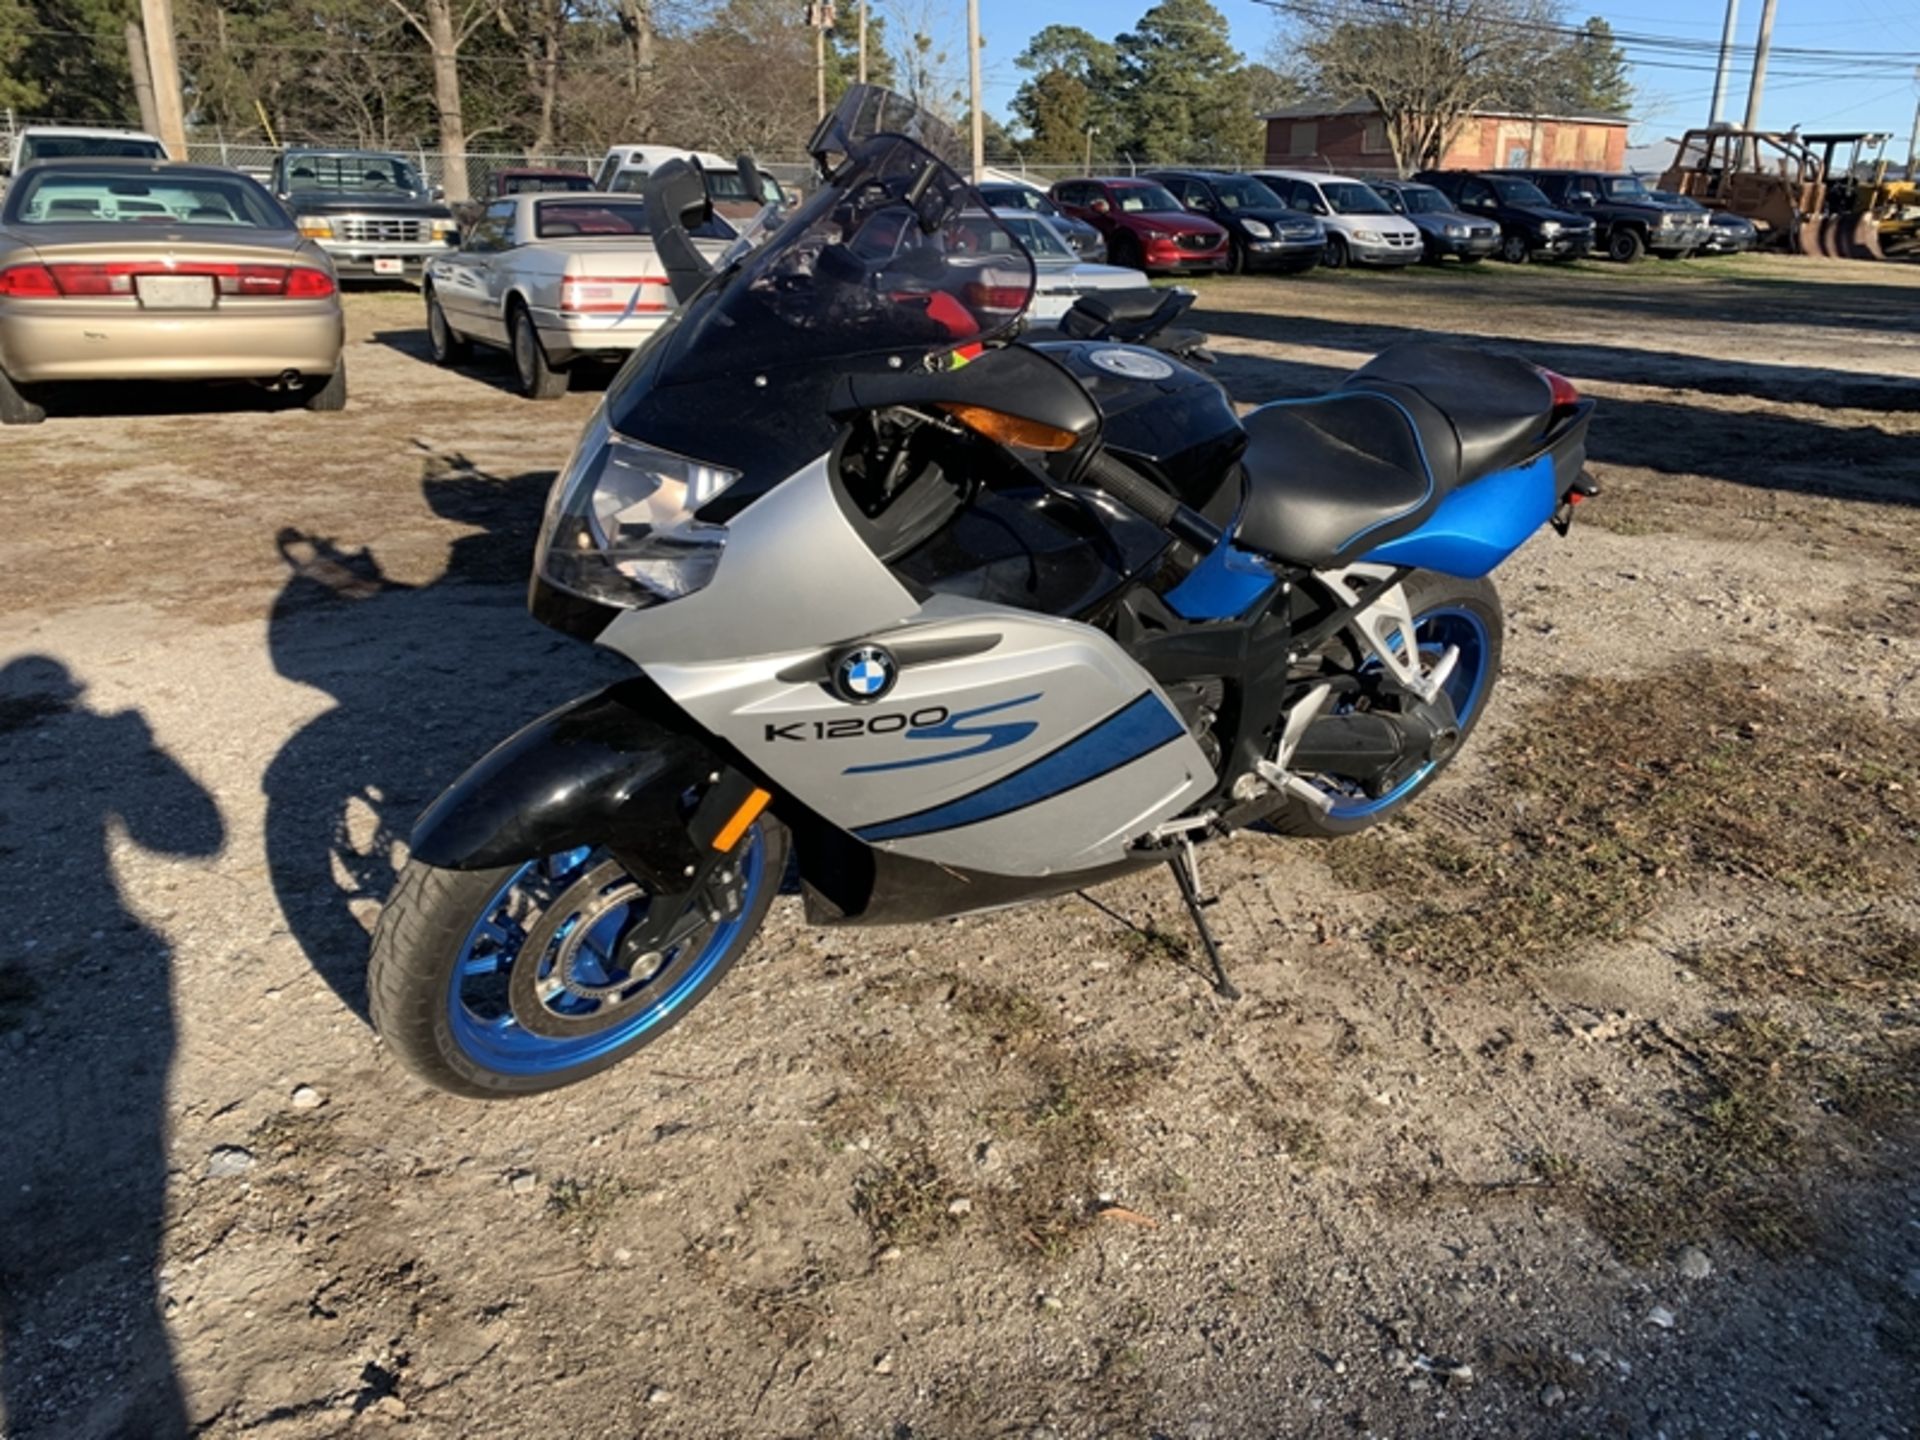 2008 BMW K1200S - 11,302 miles showing - WB10591A08ZM29270